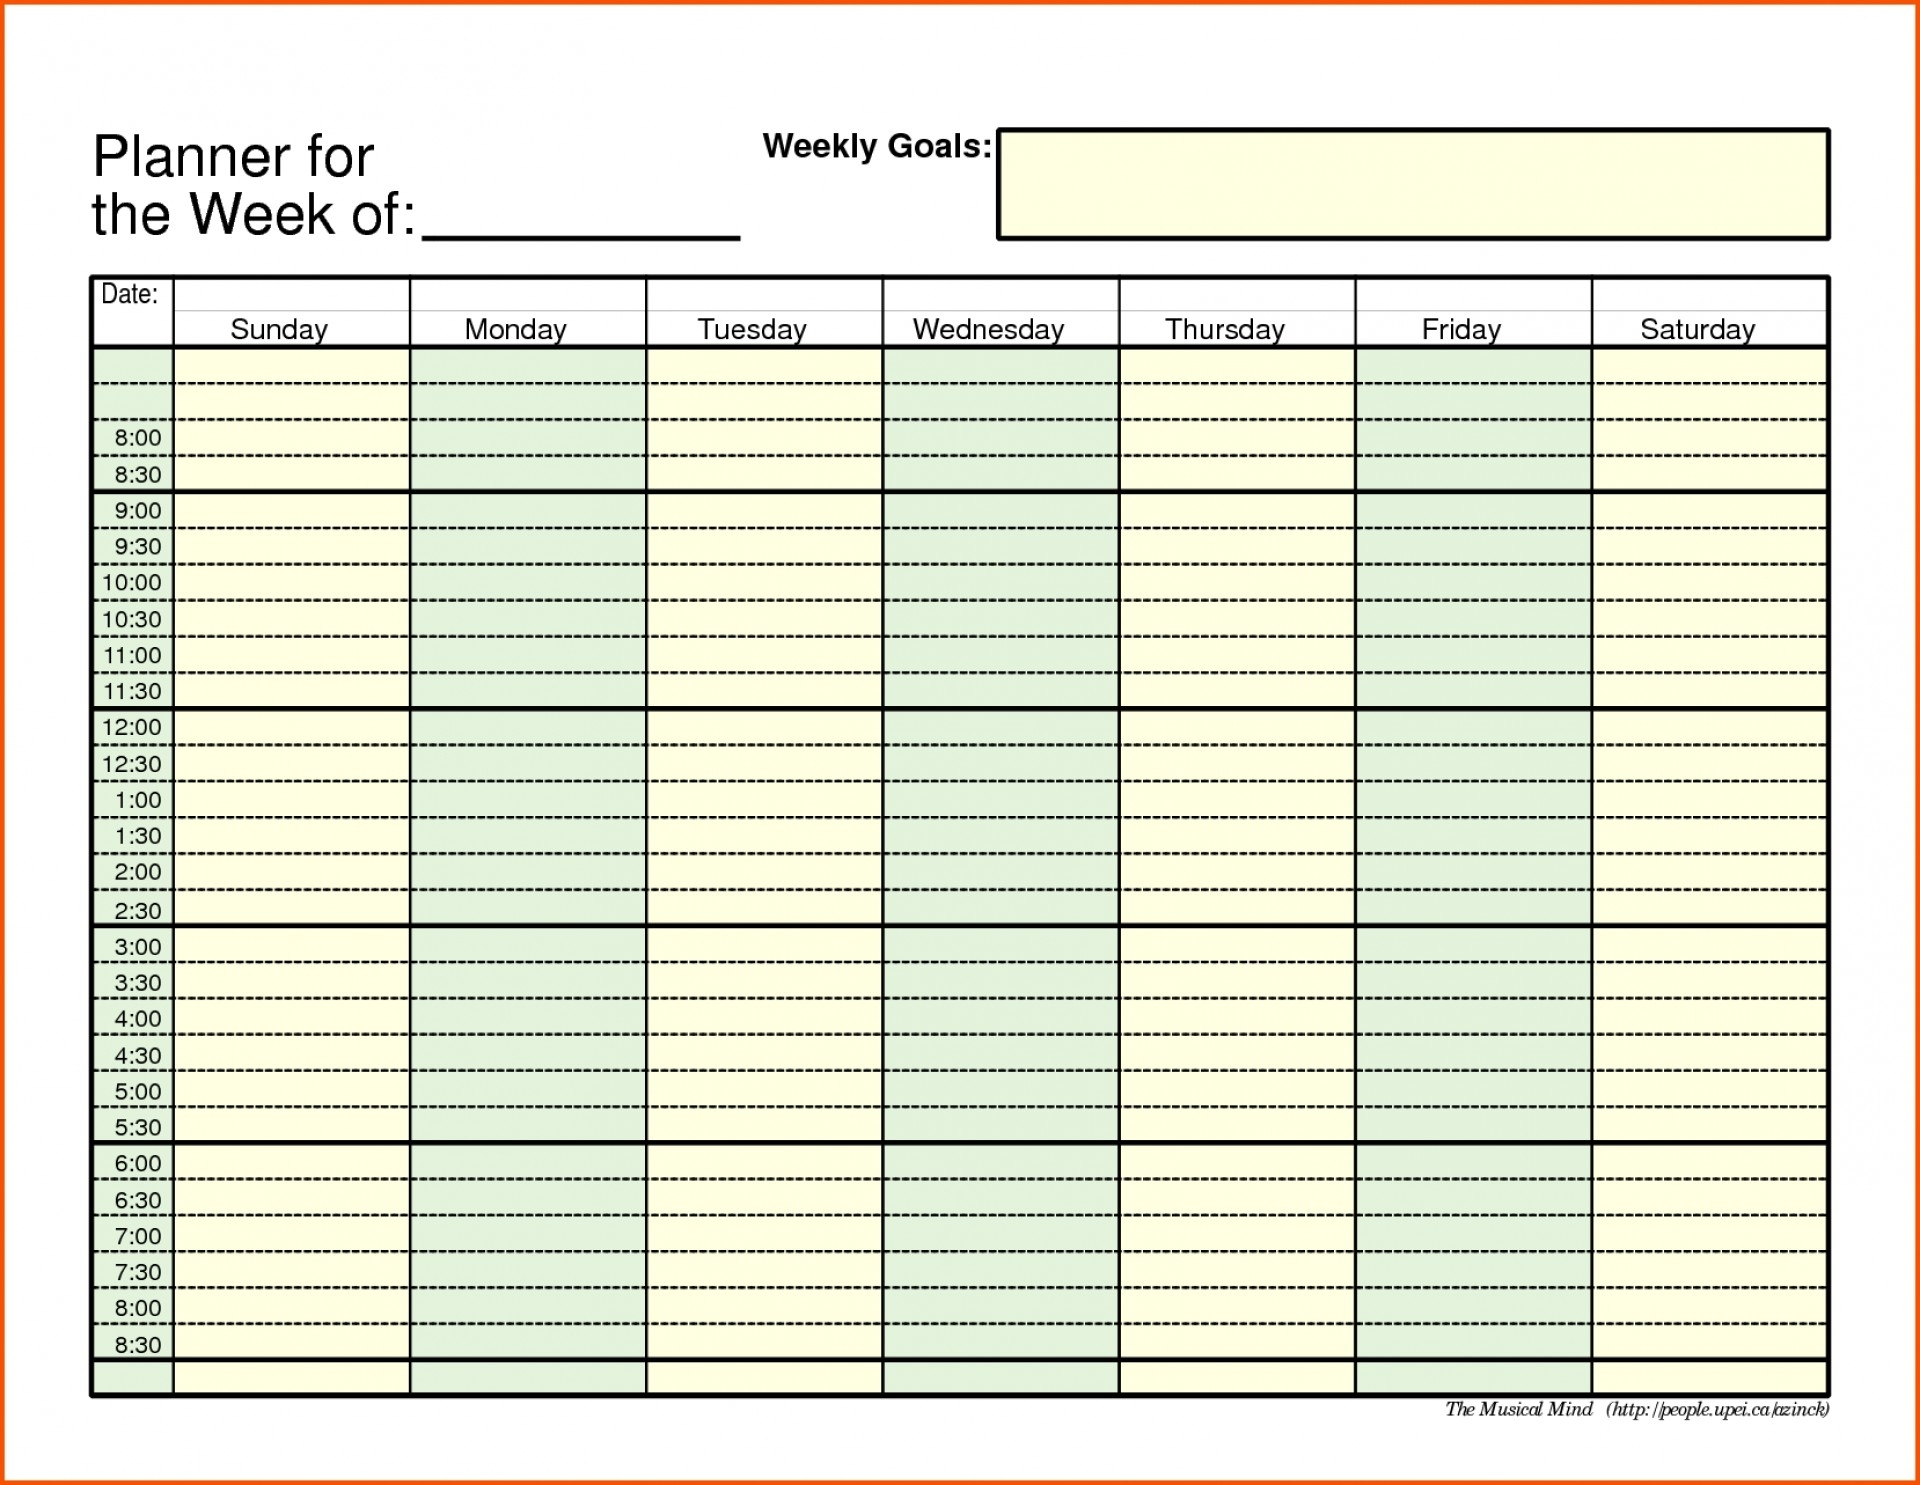 Printable Daily Schedule With Time Slots